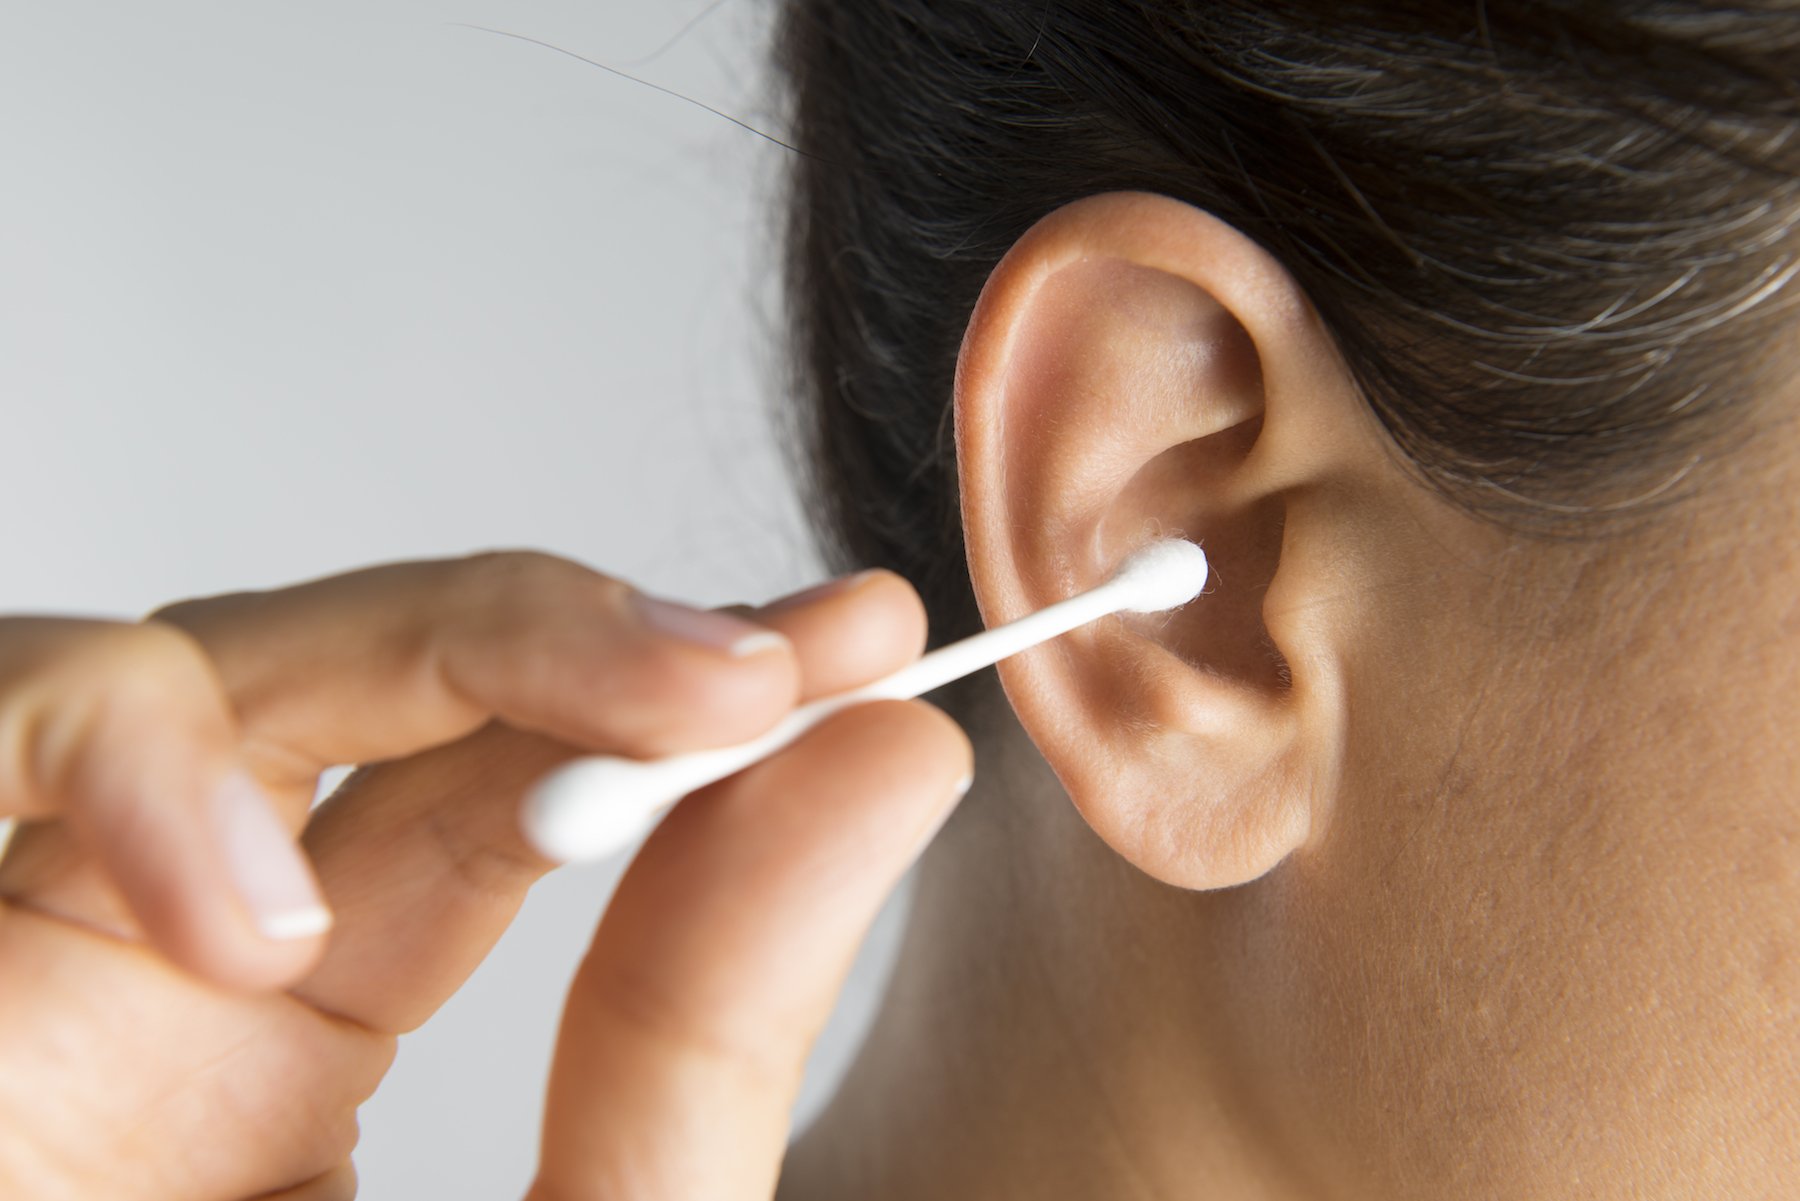 How To Take Care Of Your Ears